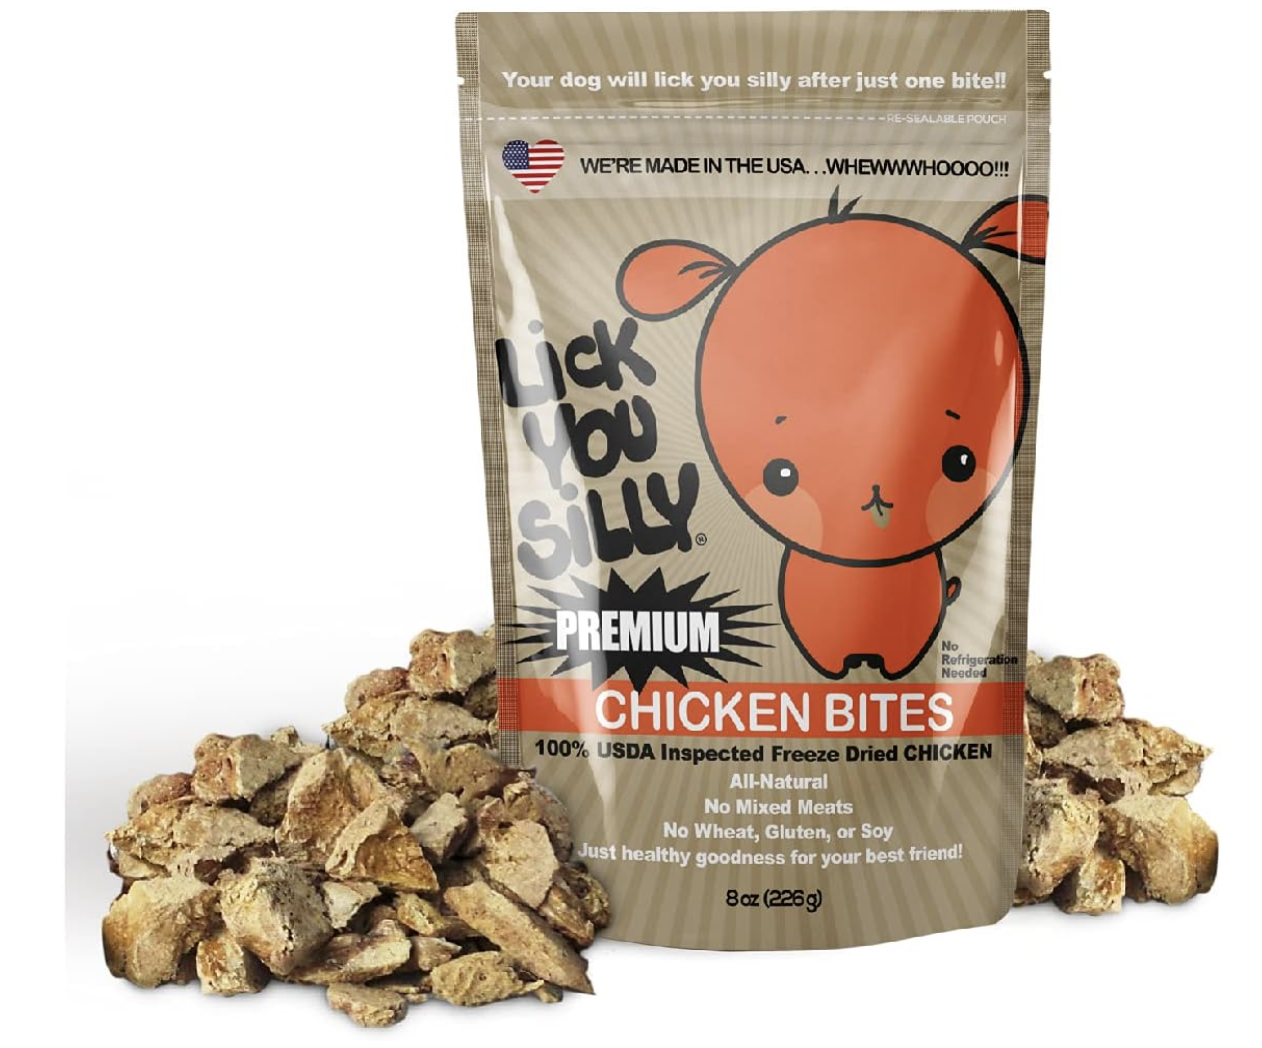 Lick You Silly: Grain-Free, All-Natural Chicken Liver Dog Treats 